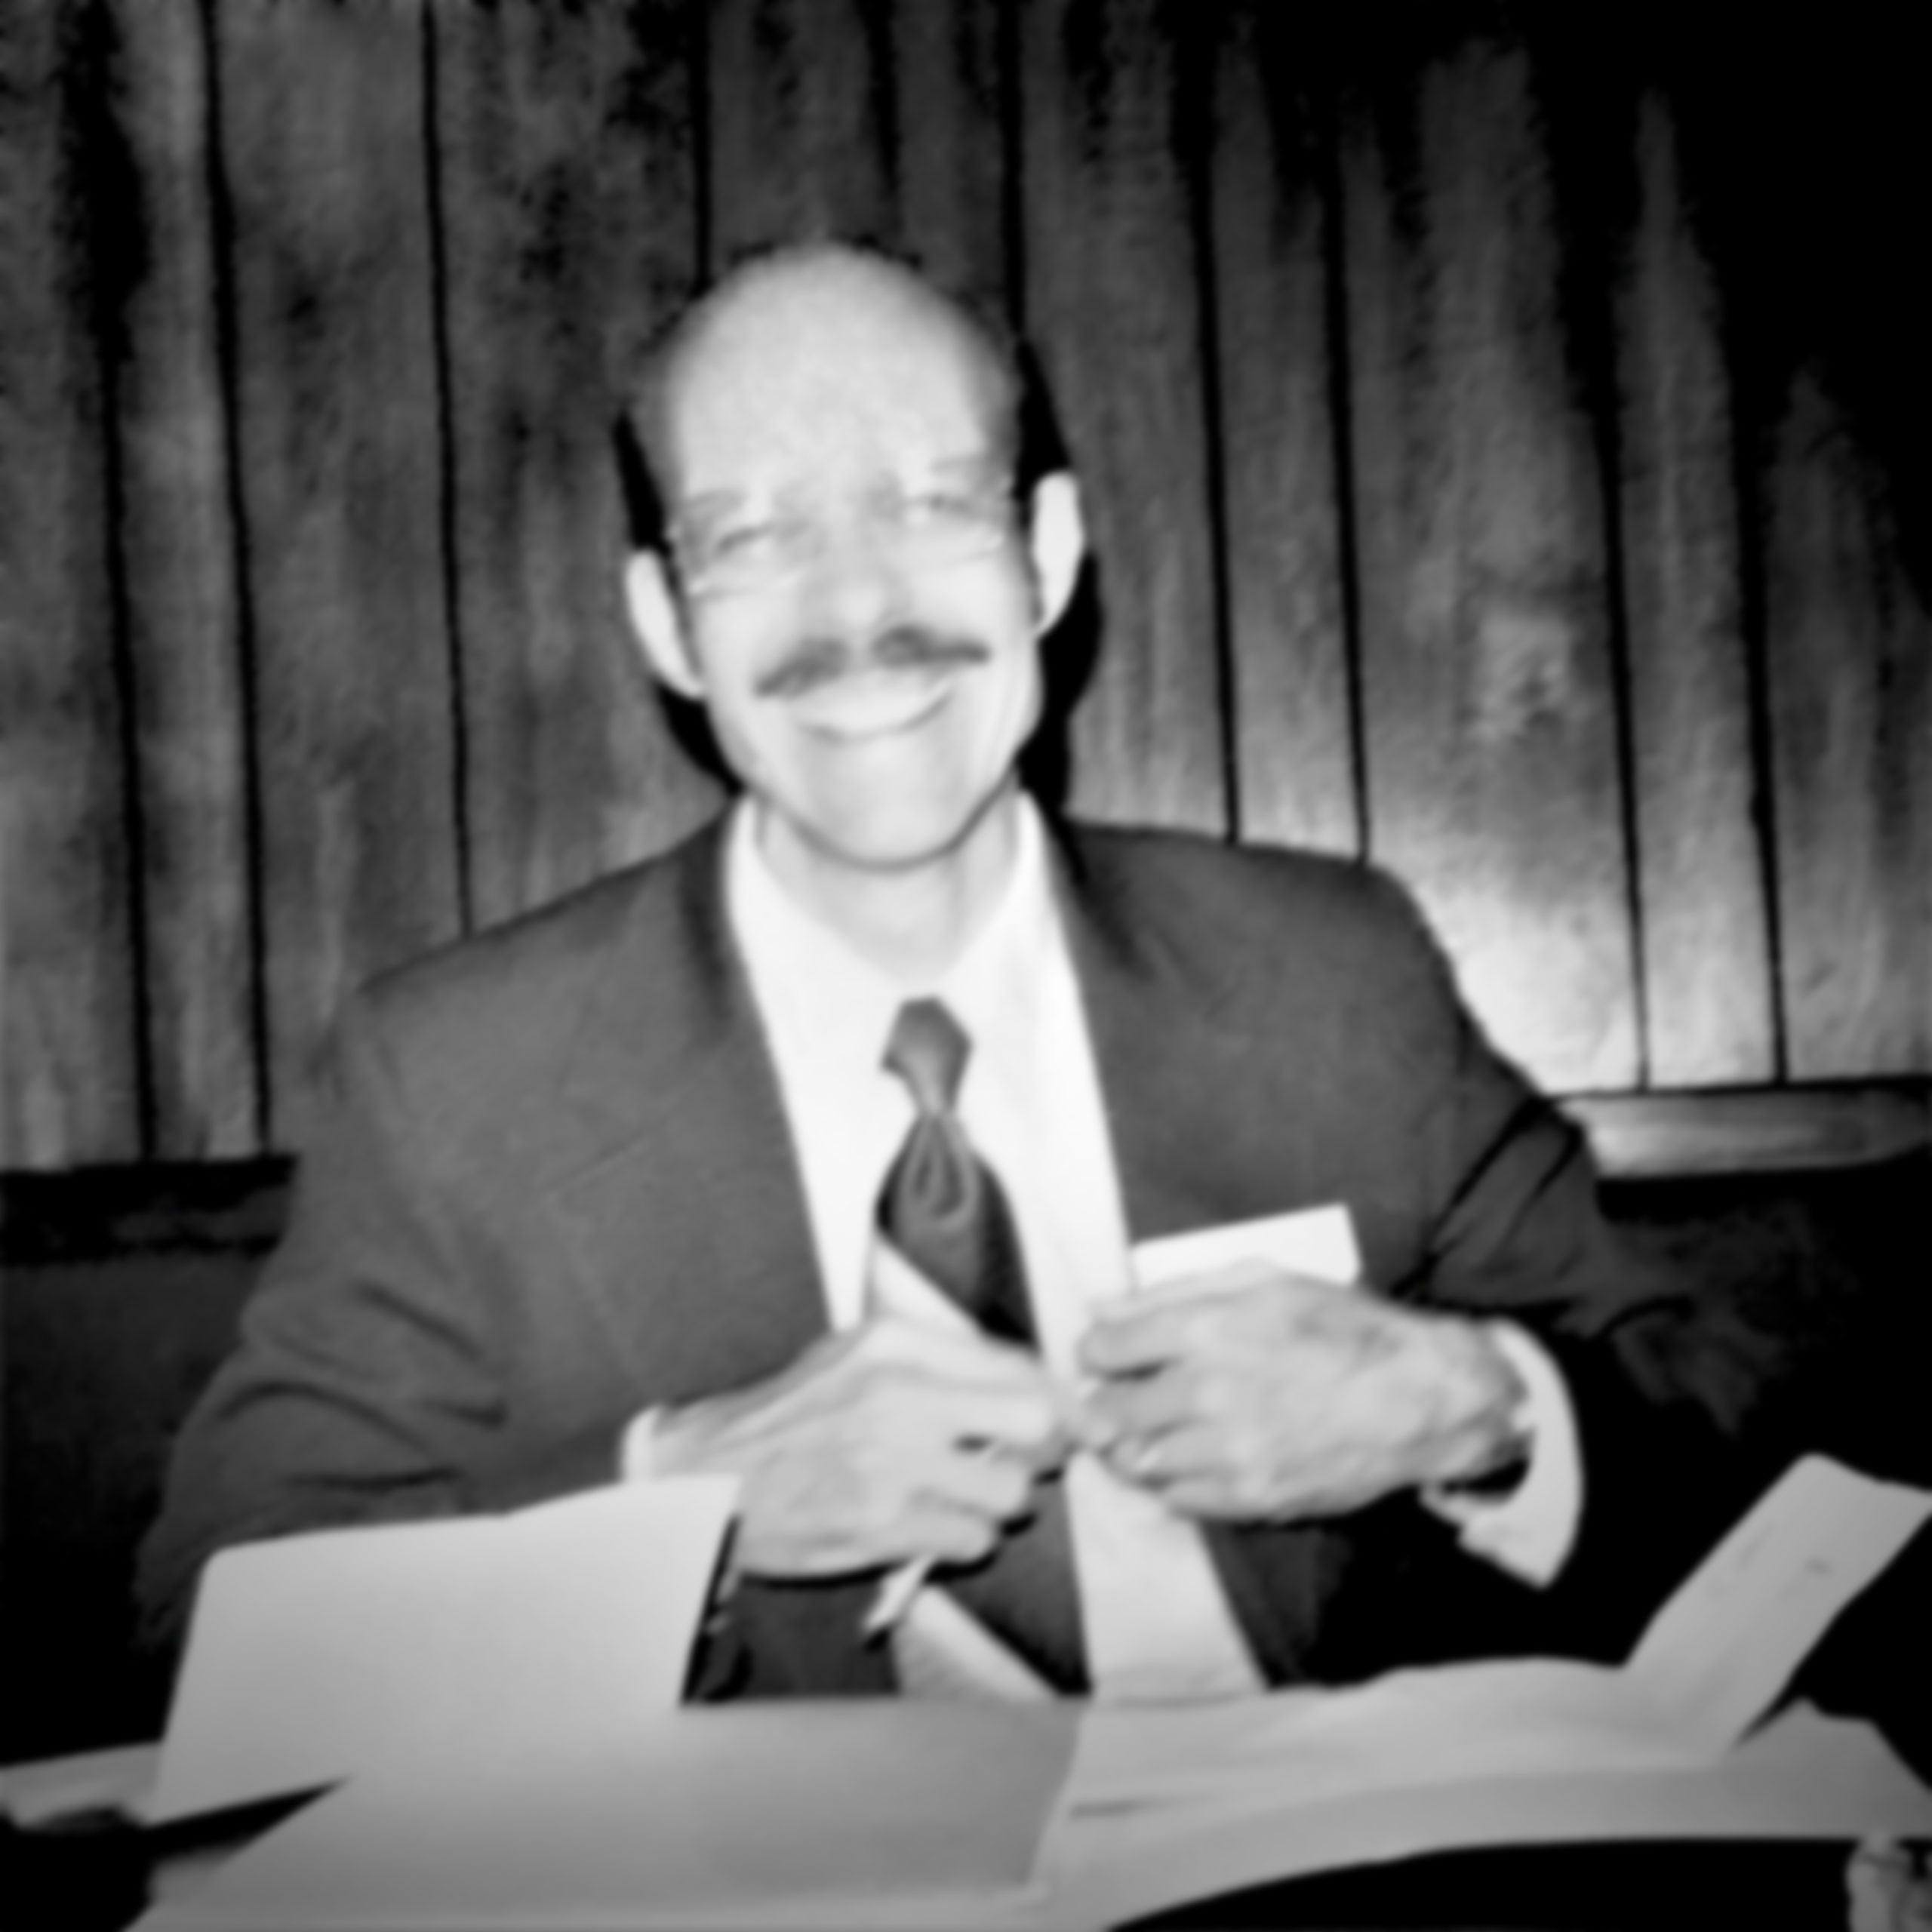 MUFON SADDENED BY THE PASSING OF DR. R. LEO SPRINKLE